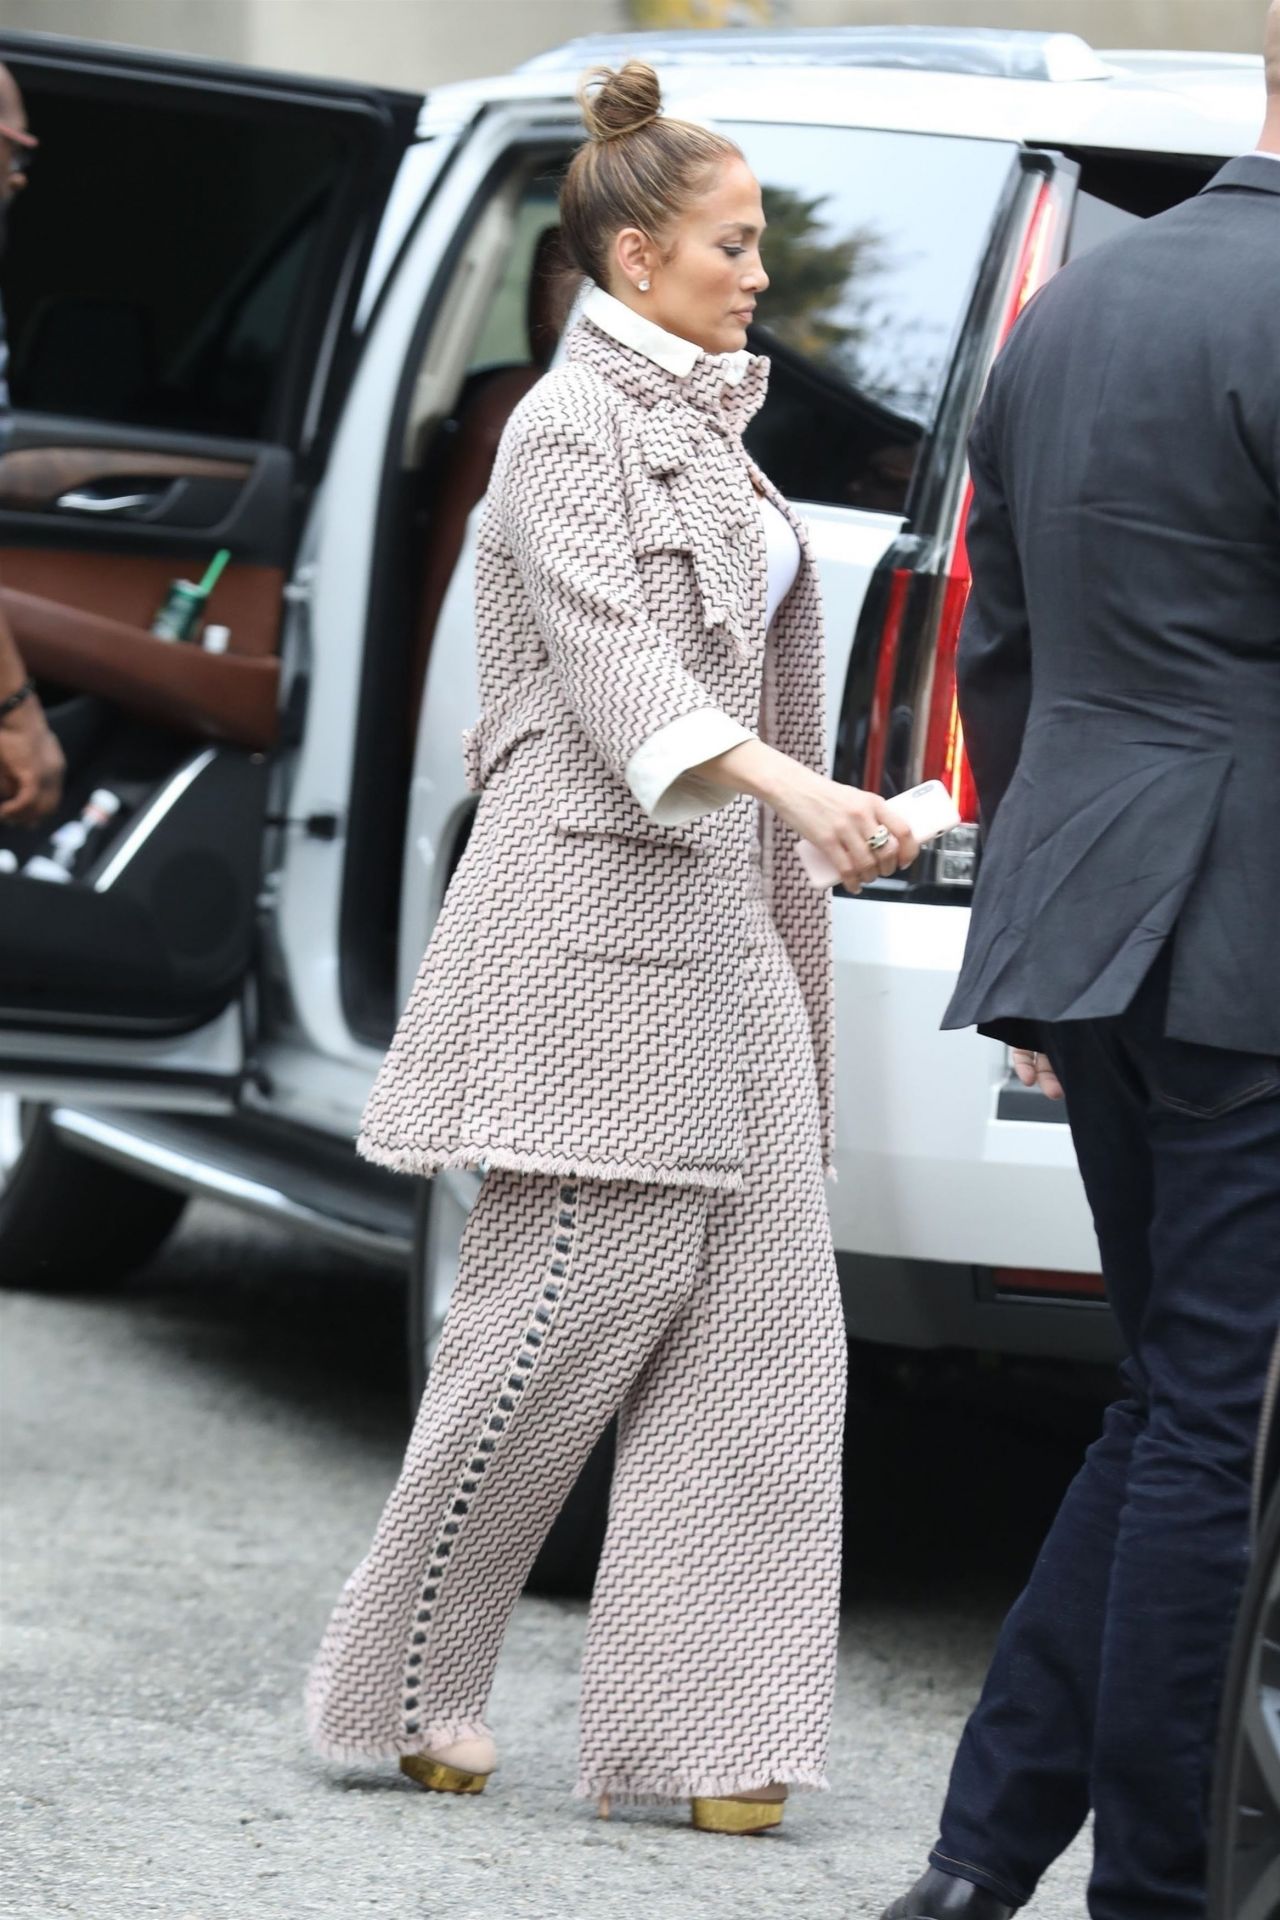 Jennifer Lopez is Stylish - Arriving for a Business Meeting in LA 02/27/20191280 x 1920